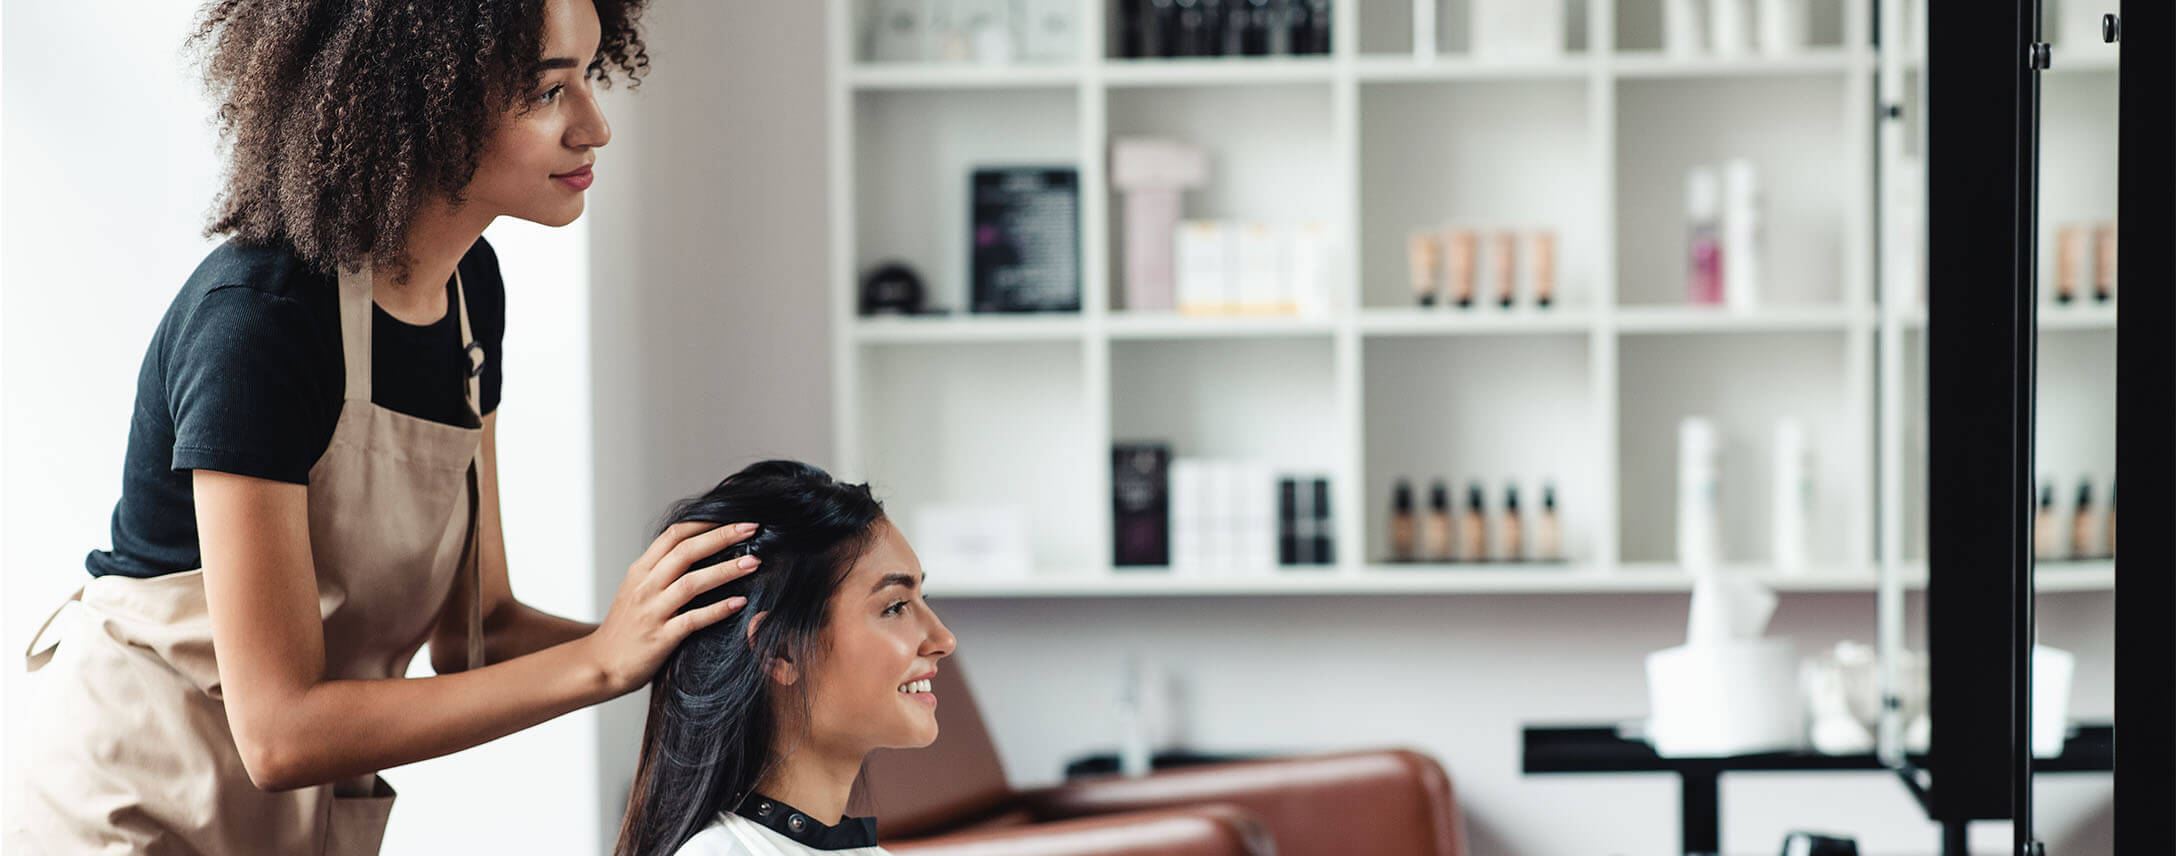 Salon or Freelance: Which is right for you?